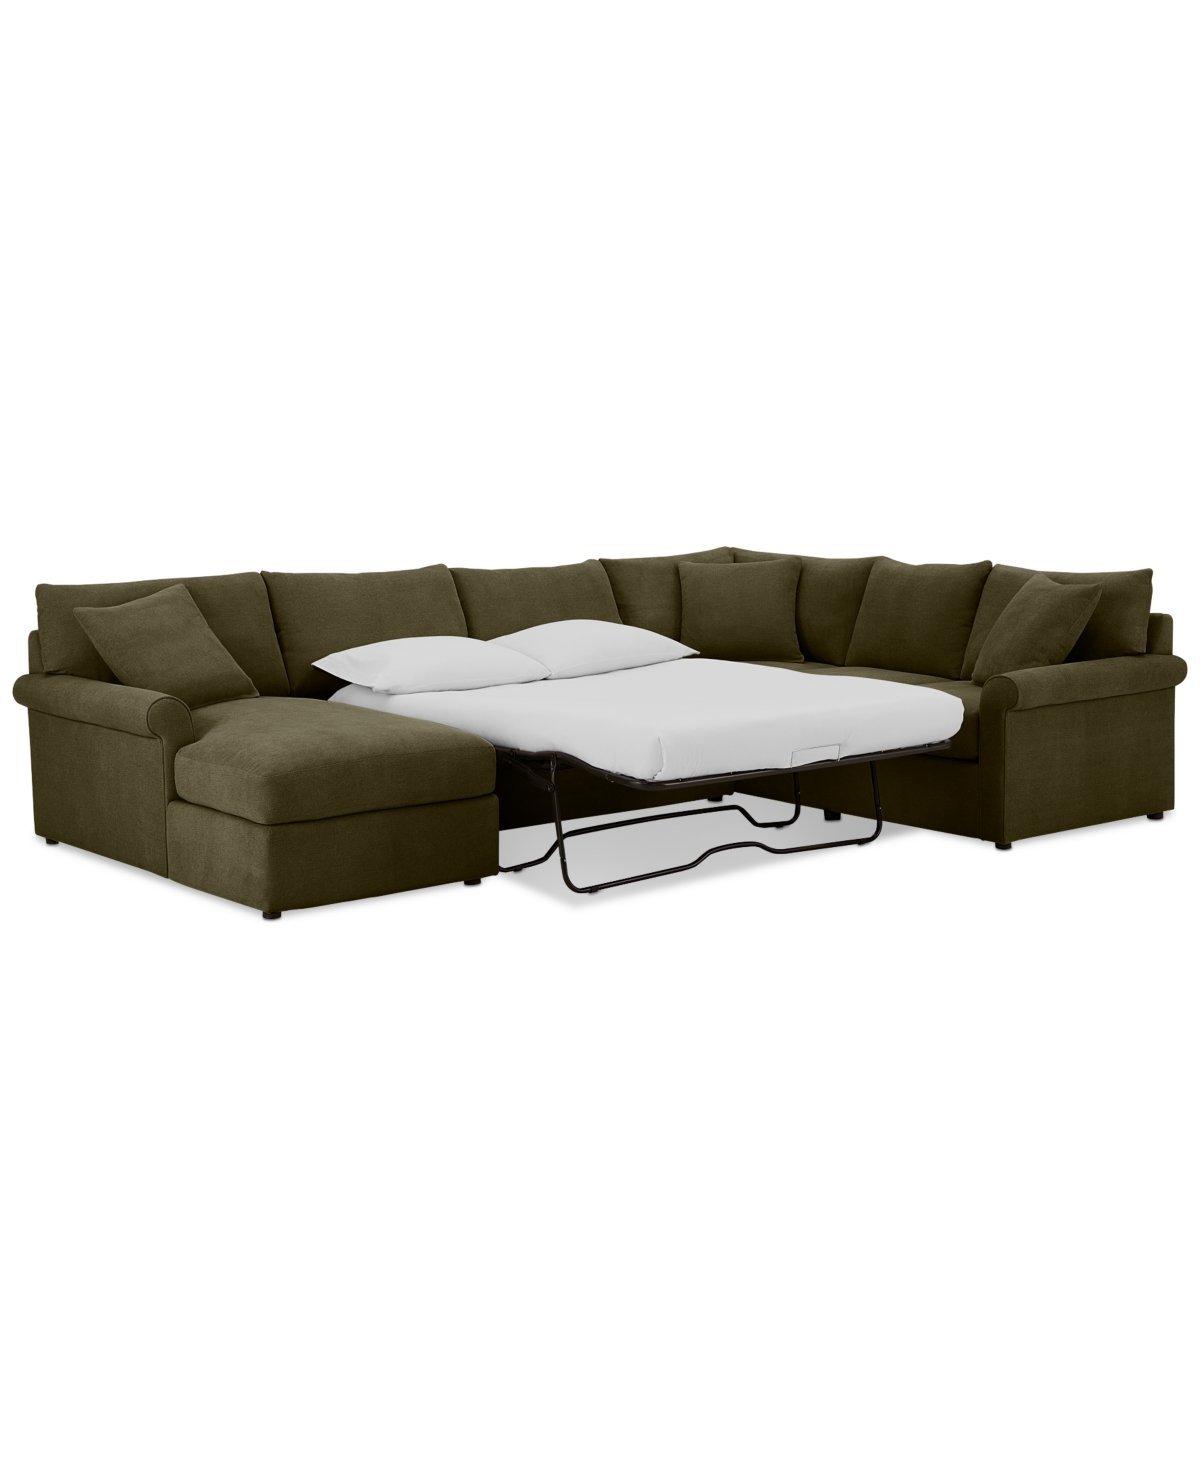 Furniture Wrenley 138" 3-pc. Fabric Sectional Chaise Sleeper Sofa, Created For Macy's In Olive